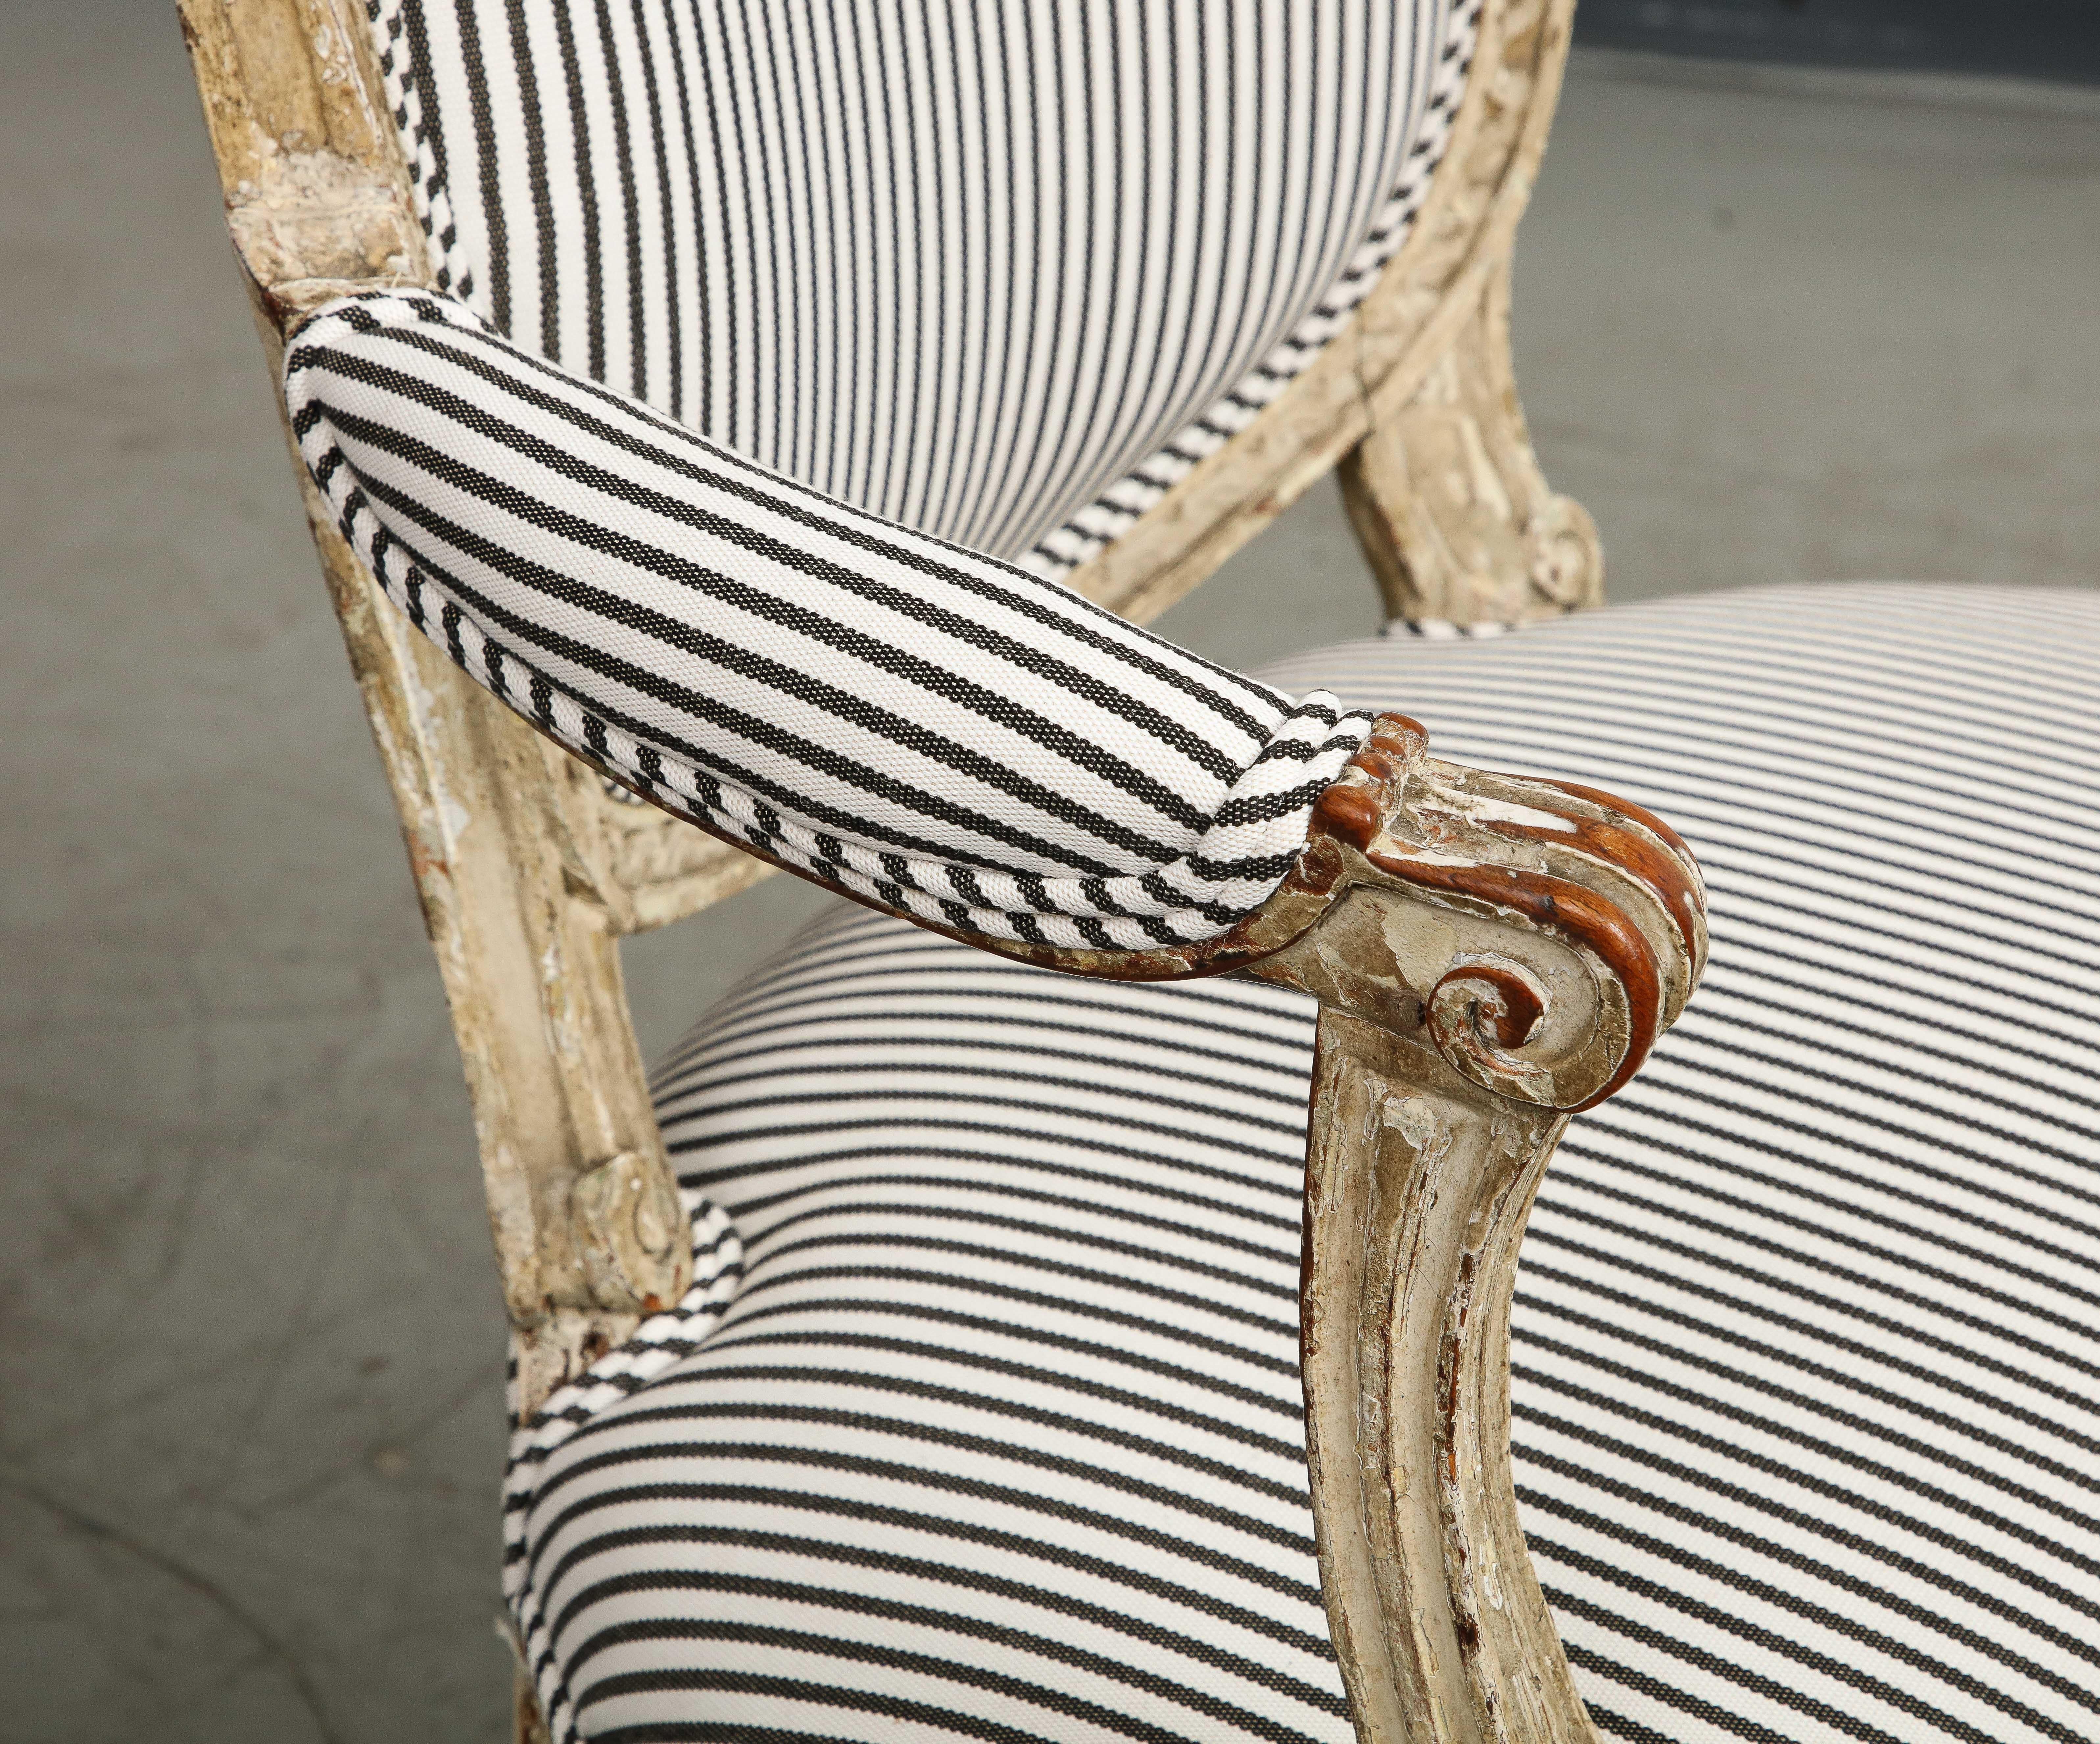 19th Century French Louis XVI Style Fauteuil Chair in Striped Linen Upholstery For Sale 6